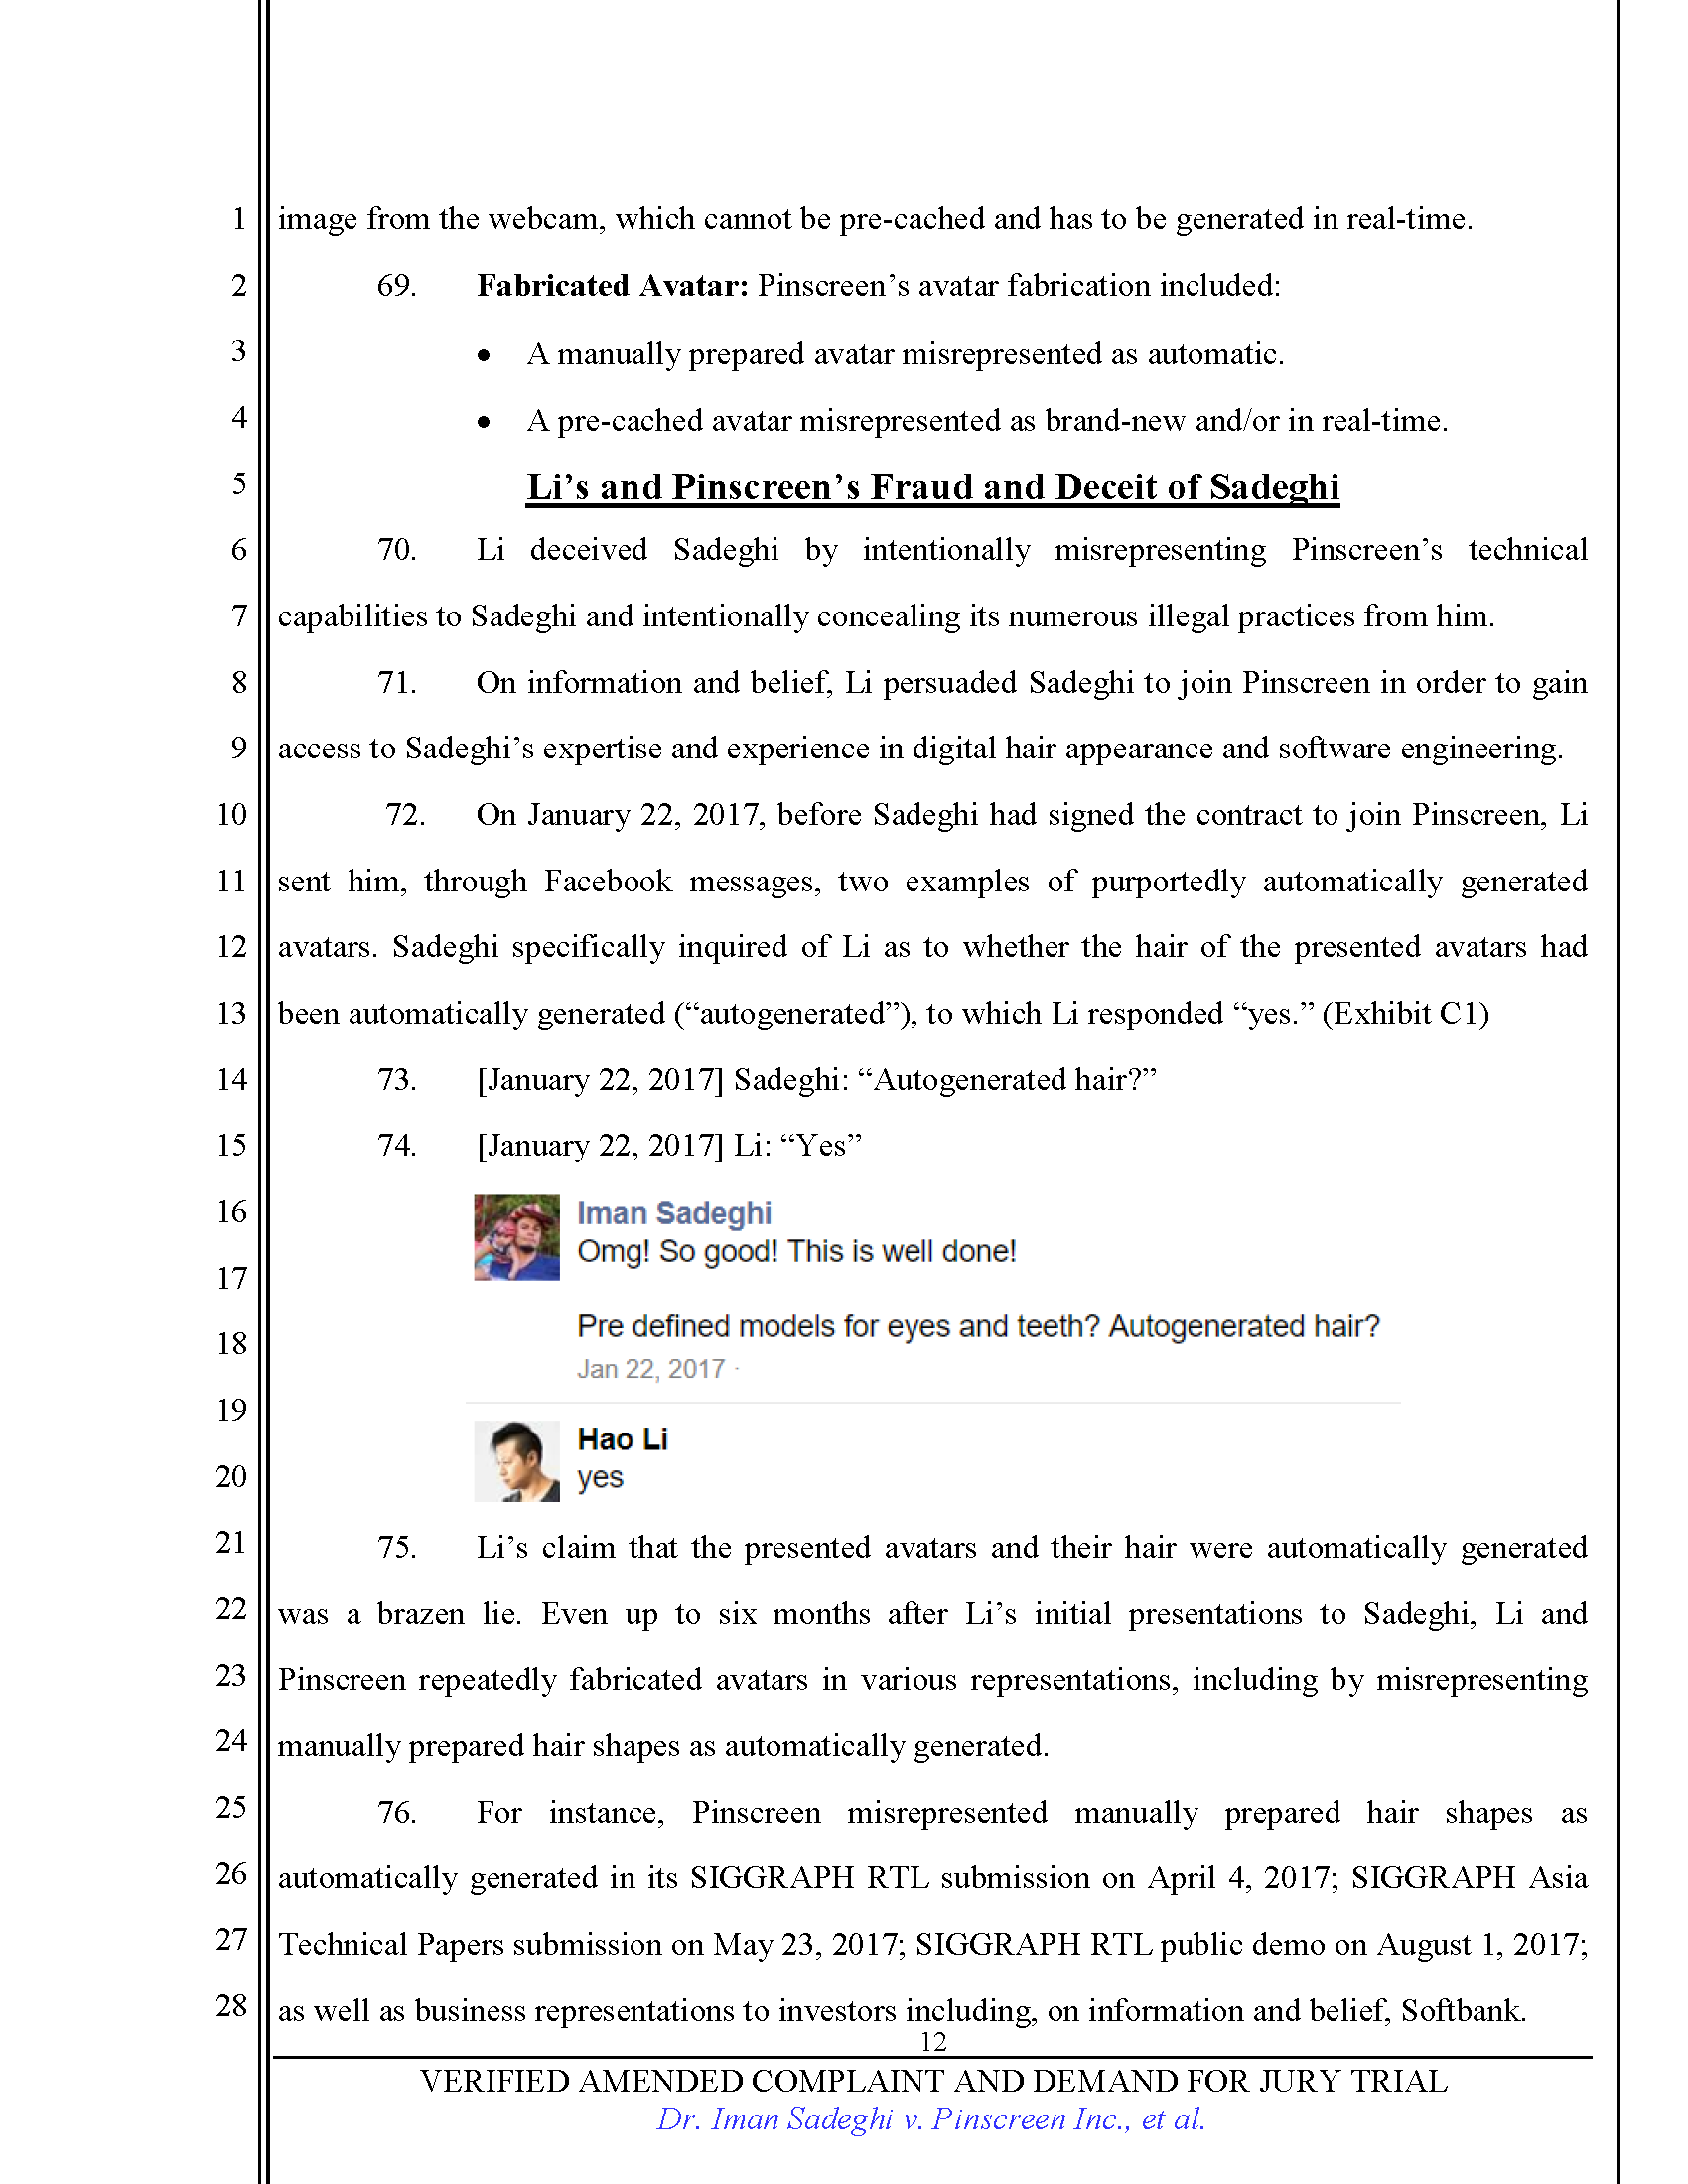 First Amended Complaint (FAC) Page 12